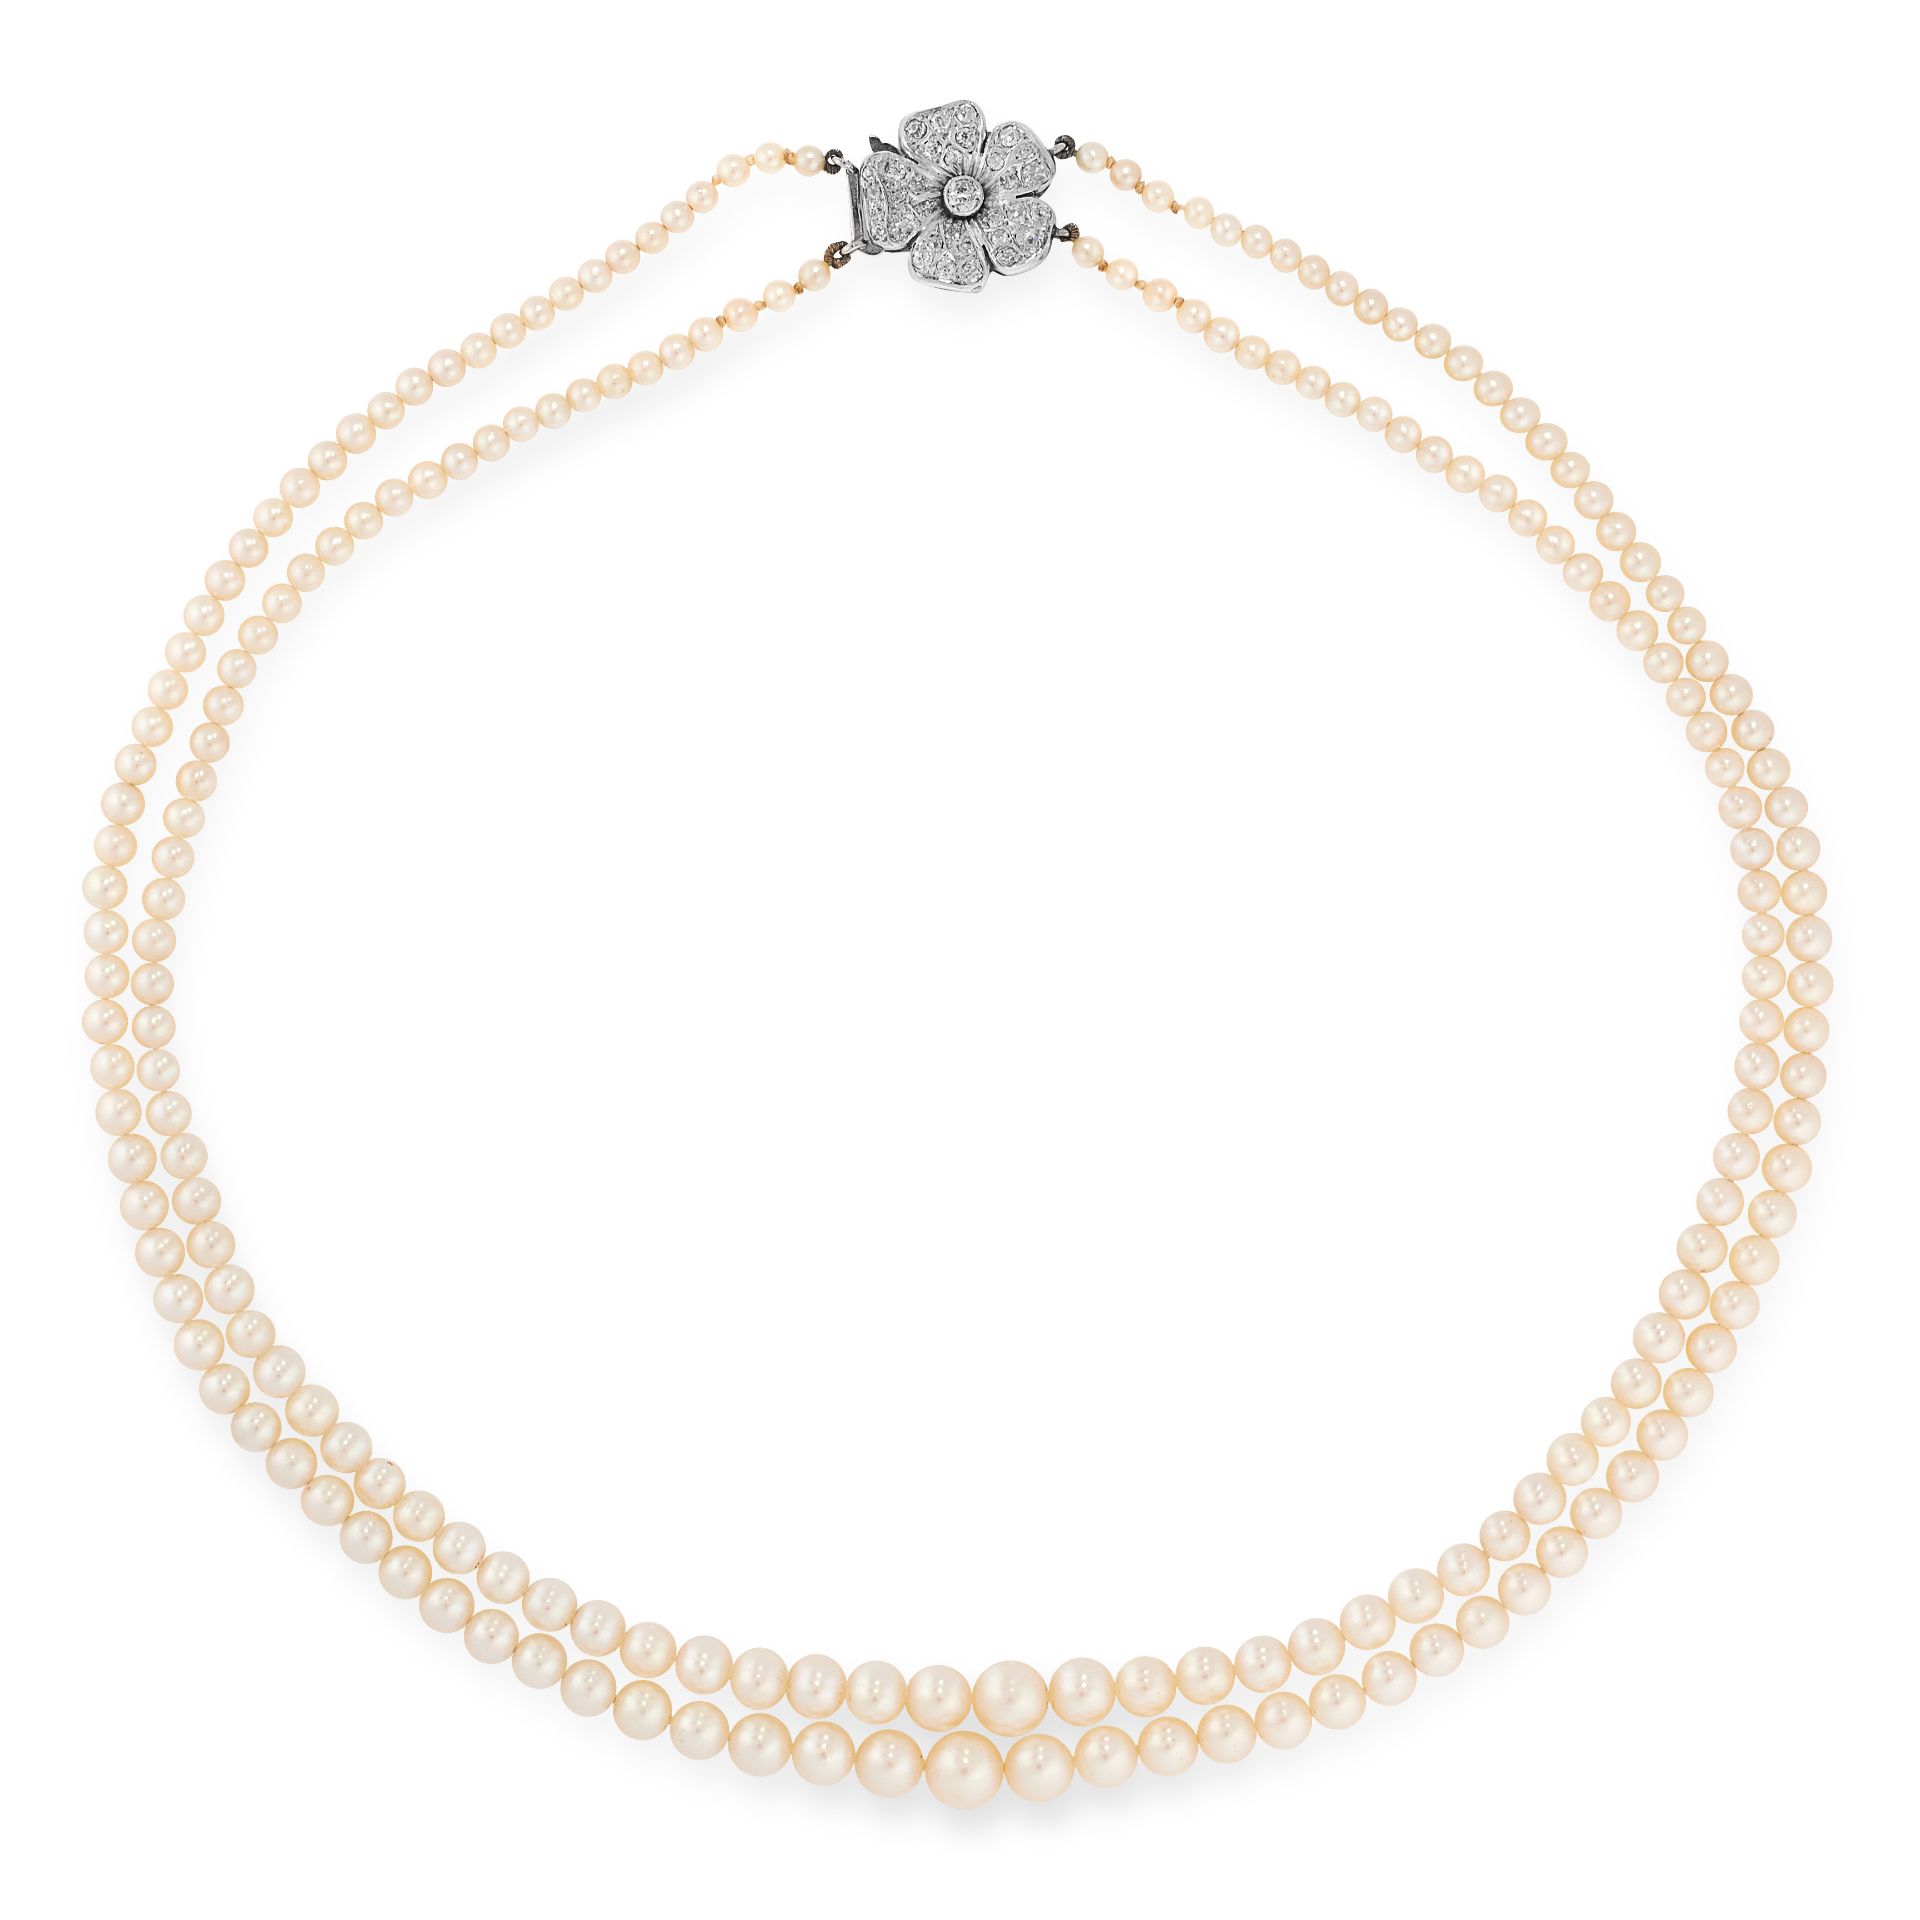 A PEARL AND DIAMOND NECKLACE, CIRCA 1955 in platinum, comprising two rows of graduated pearls